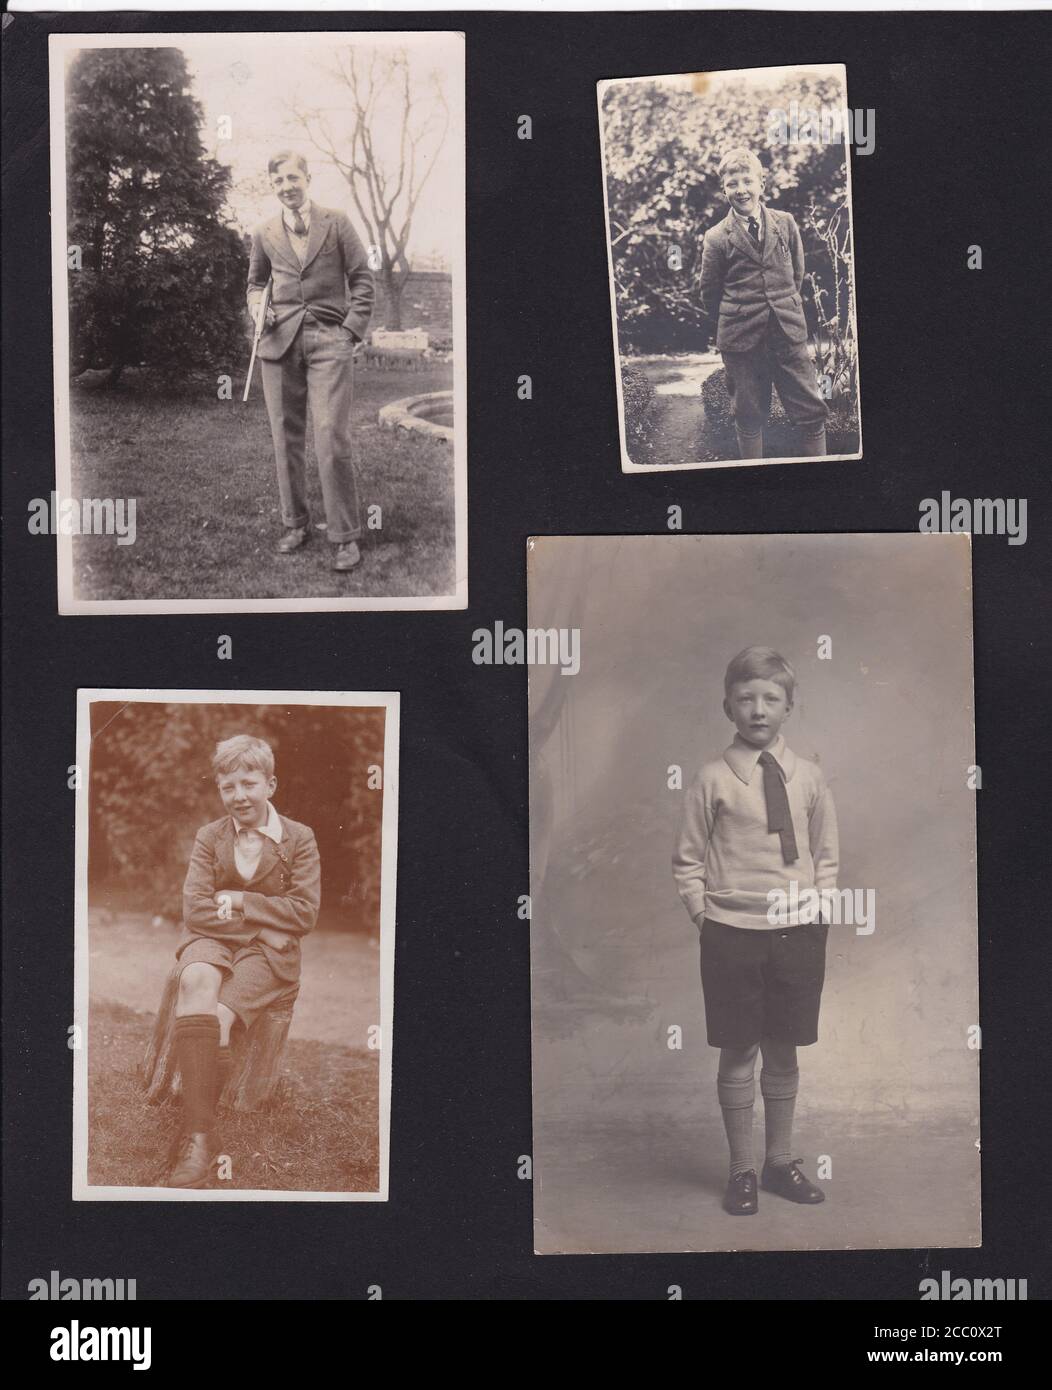 Vintage black and white photos from a family album 1920s / 1930s Stock Photo